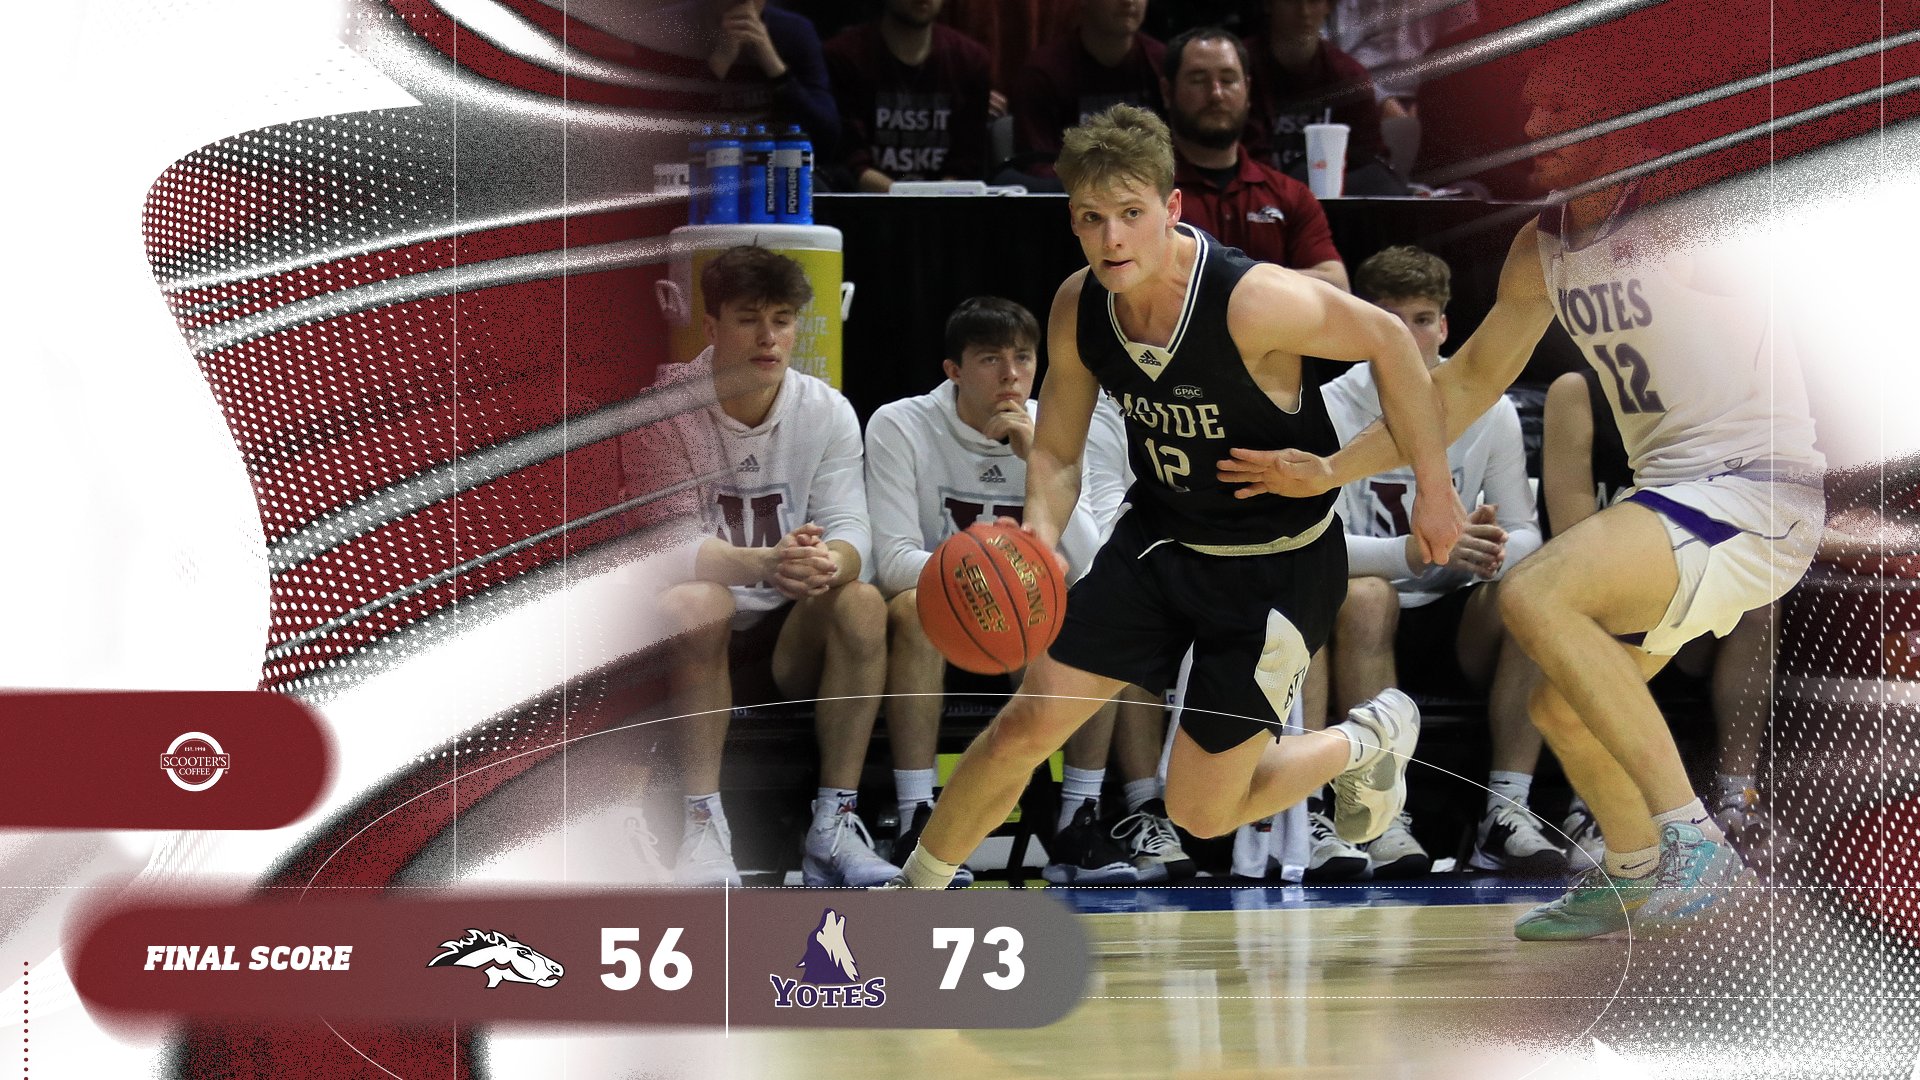 Morningside's season comes to a close in quarterfinals